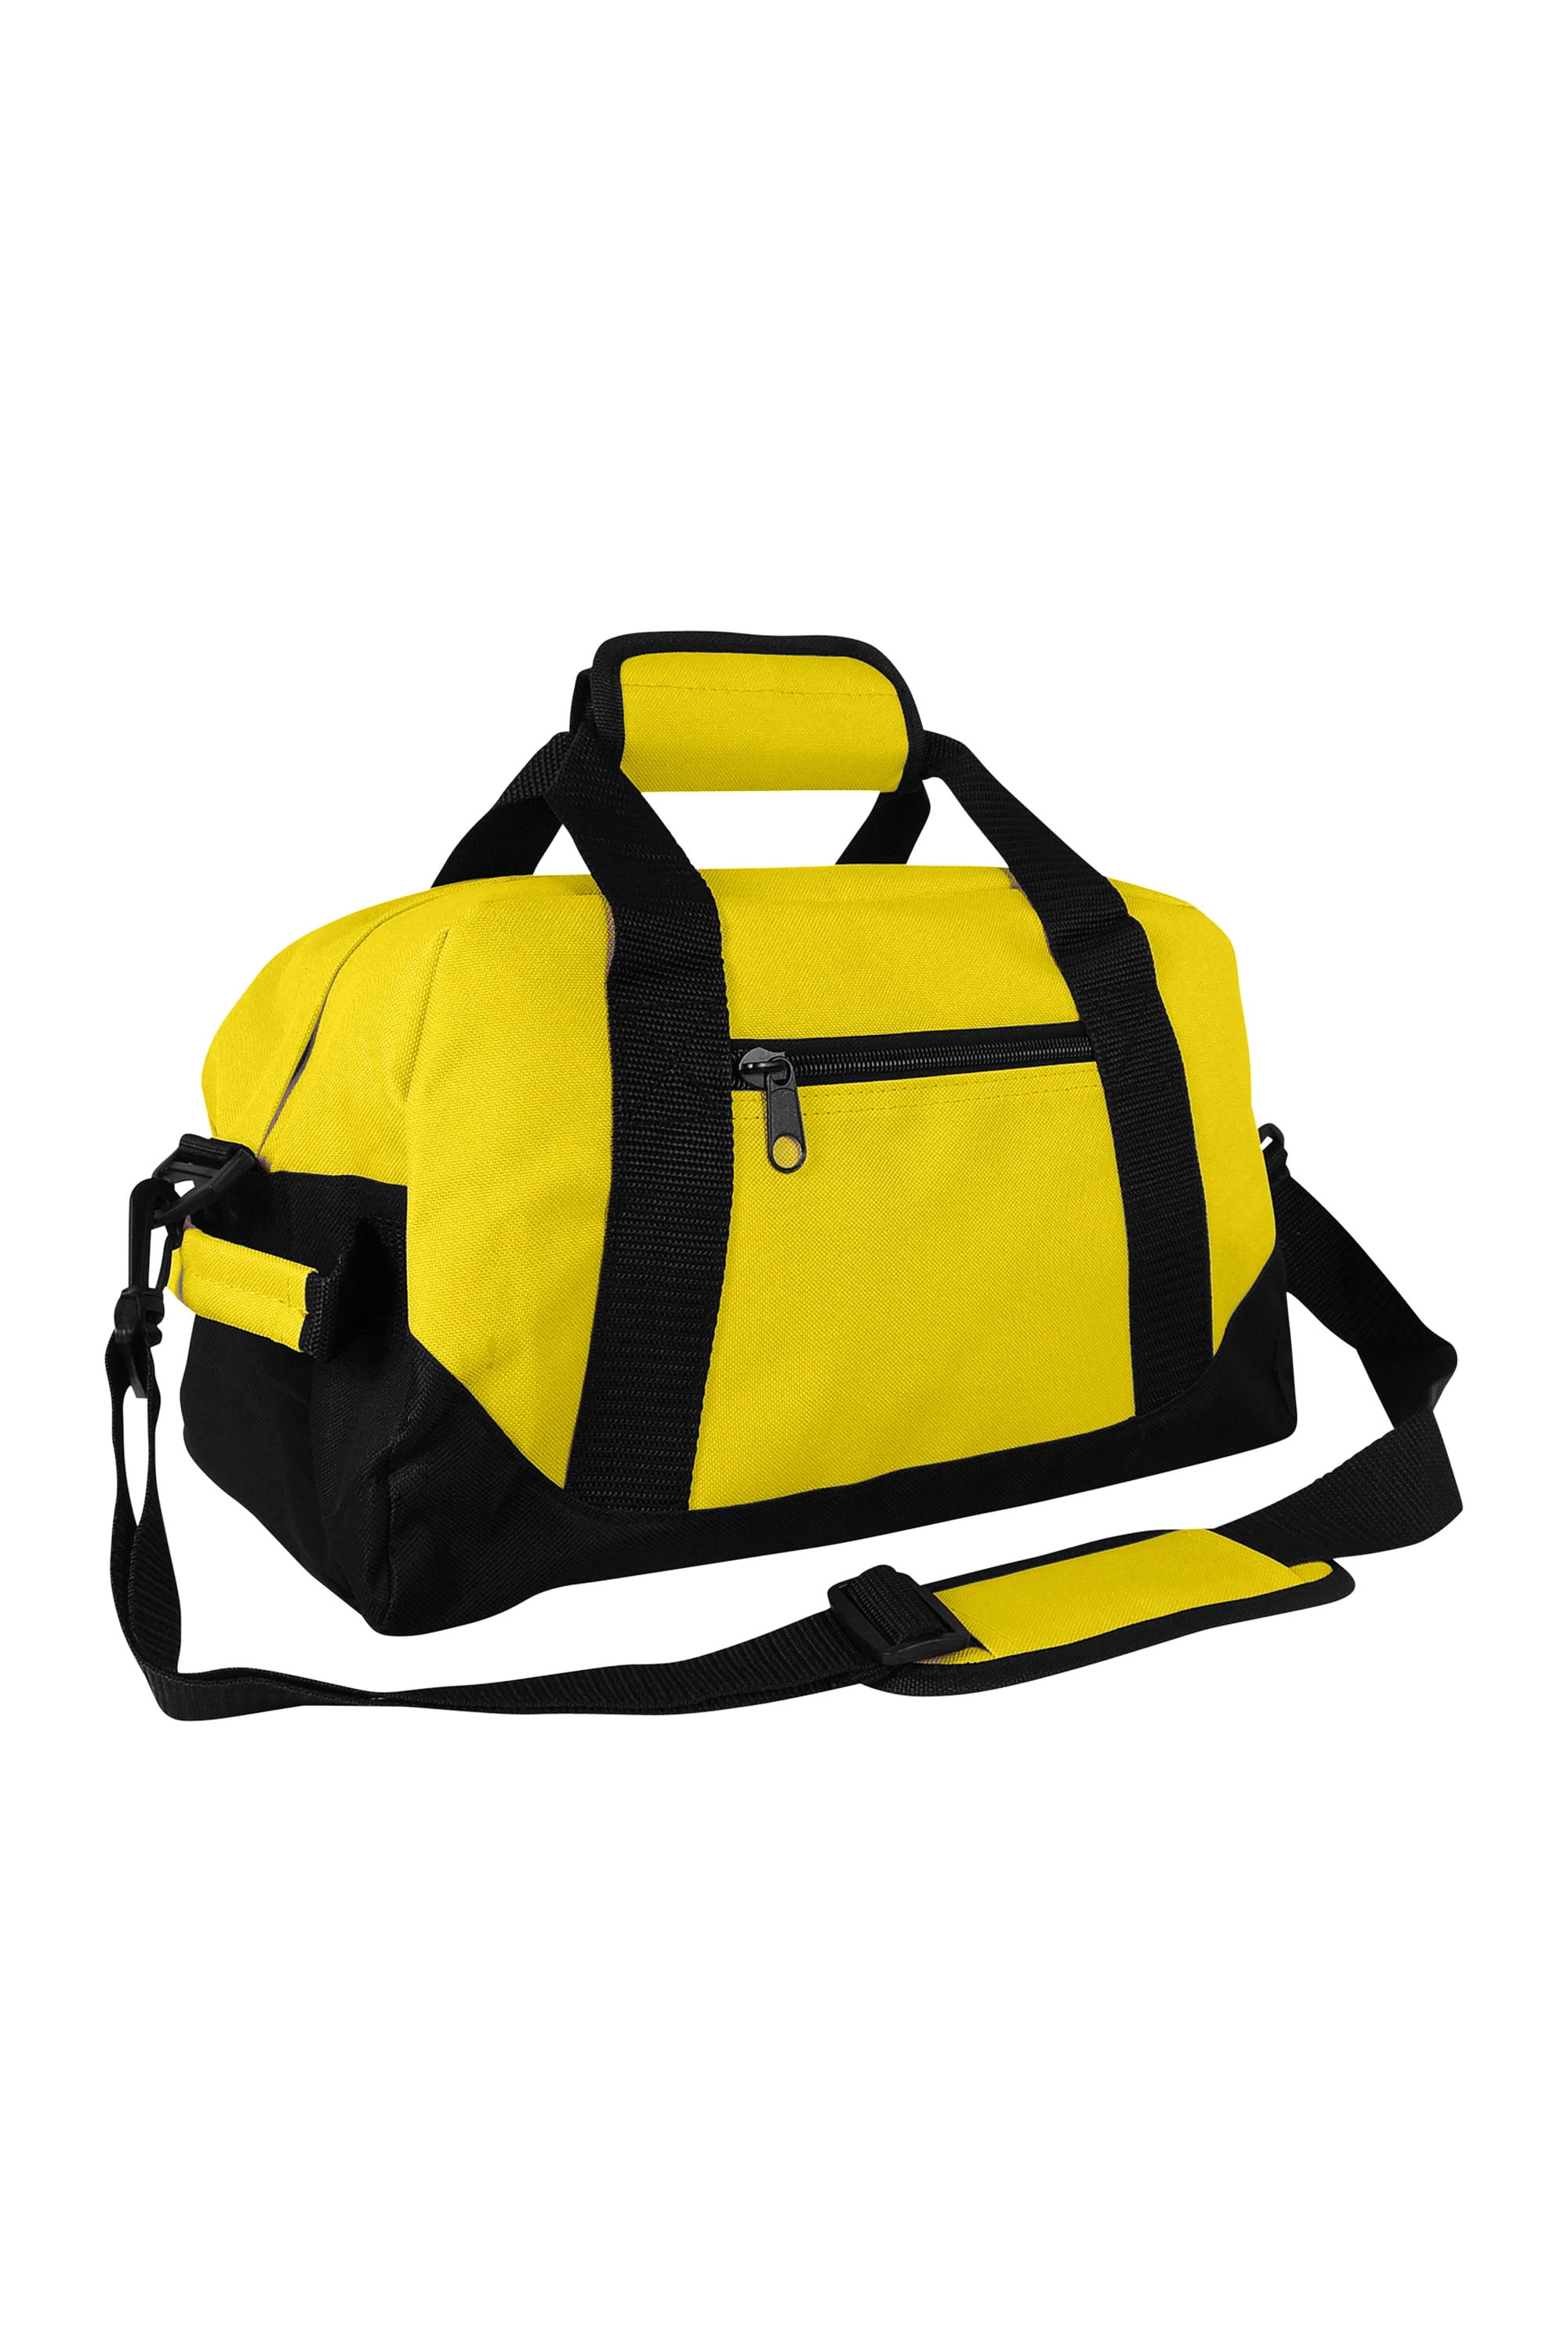 12" Small Duffle Bag Gym Mini Travel Overnight Work Out Bag Yellow Blue Red 